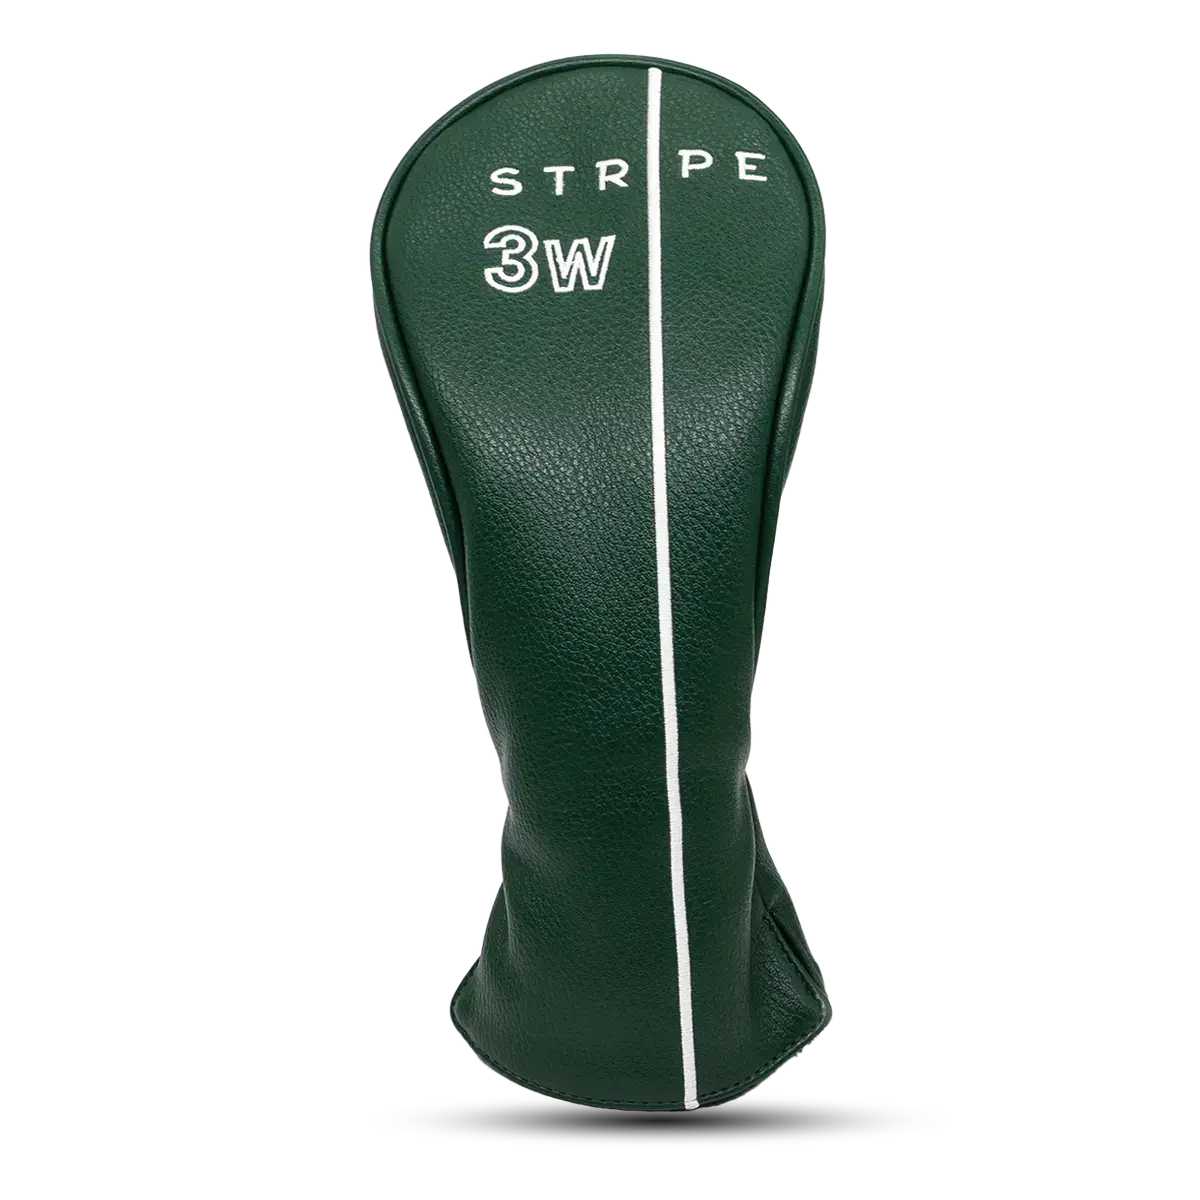 Fairway woods headcover in green leather with a white embroidered logo. Inside, there's protective fleece to keep your clubs snug and secure. Style meets protection!